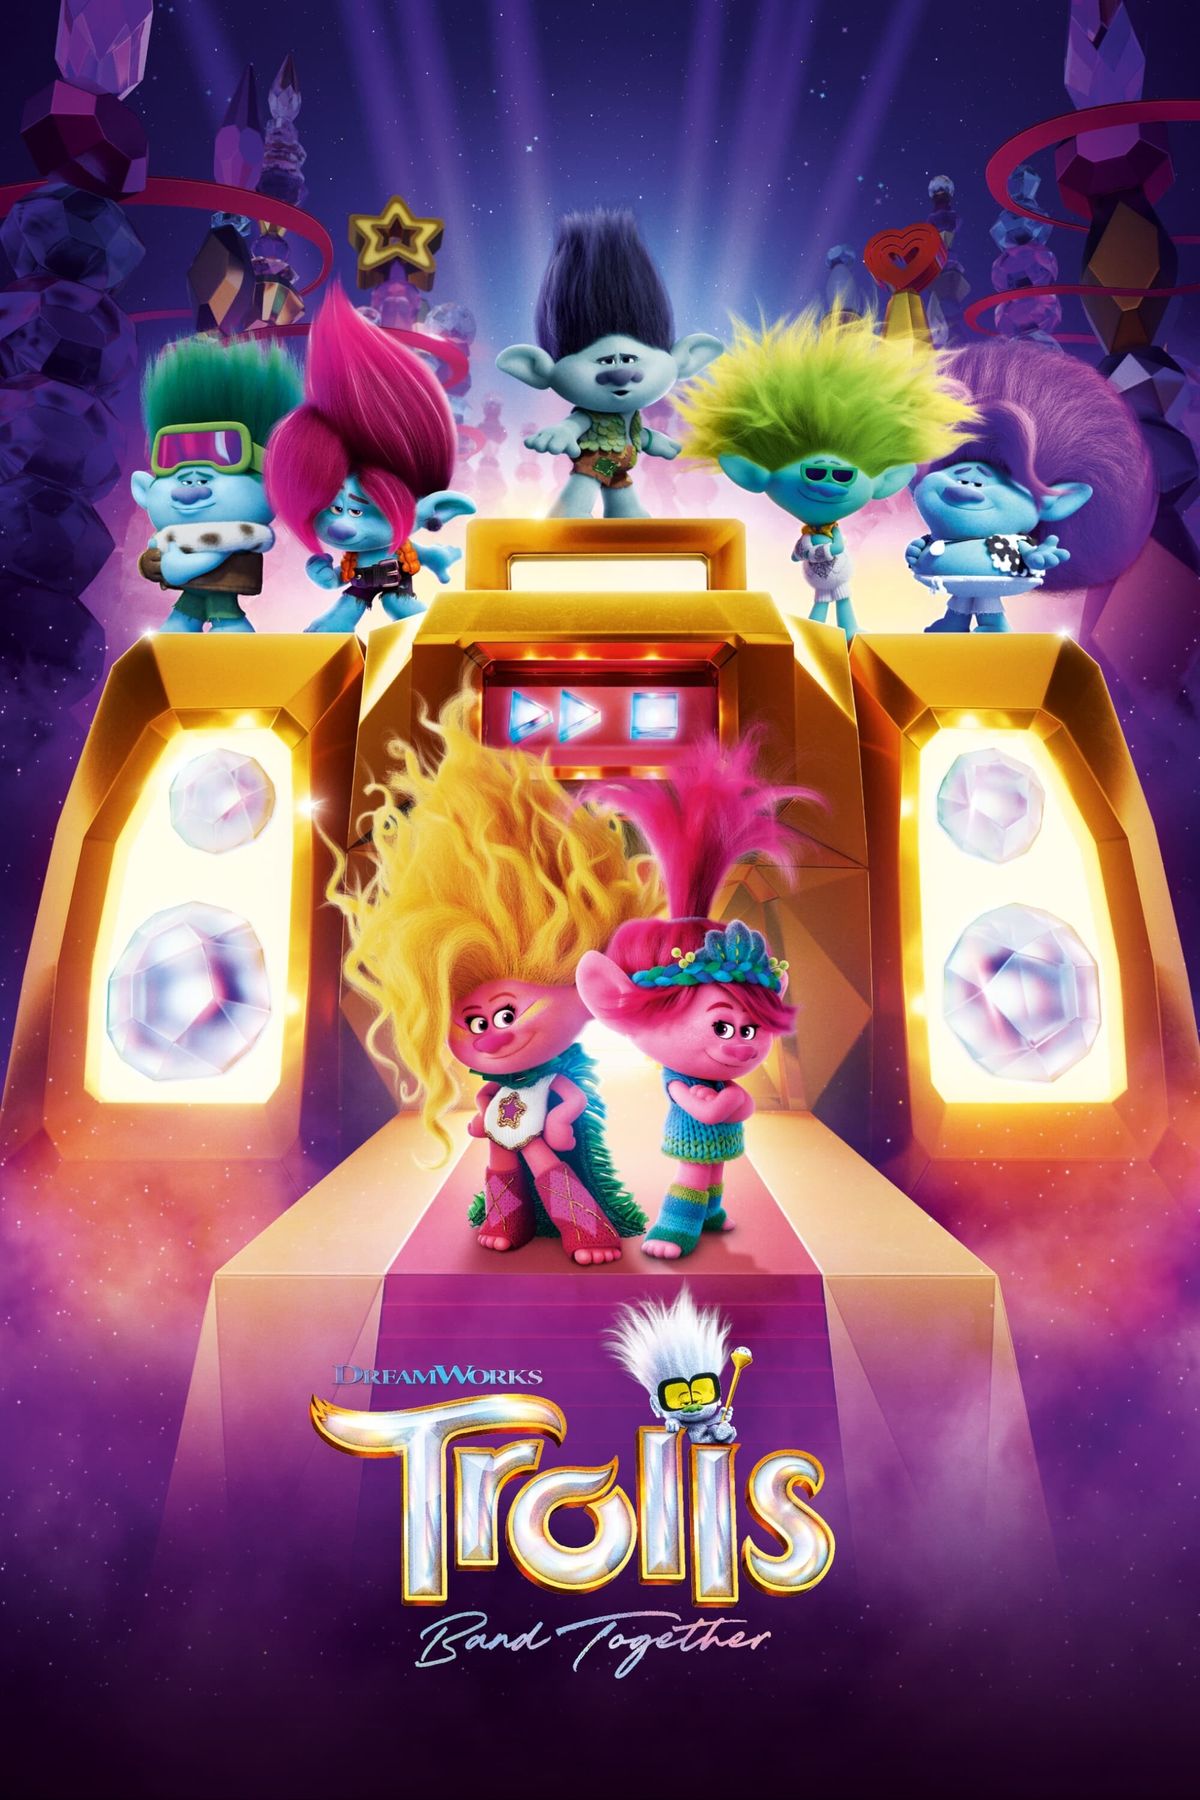 Trolls 3 Trolls Band Together 2023 Movie Posters and Digital